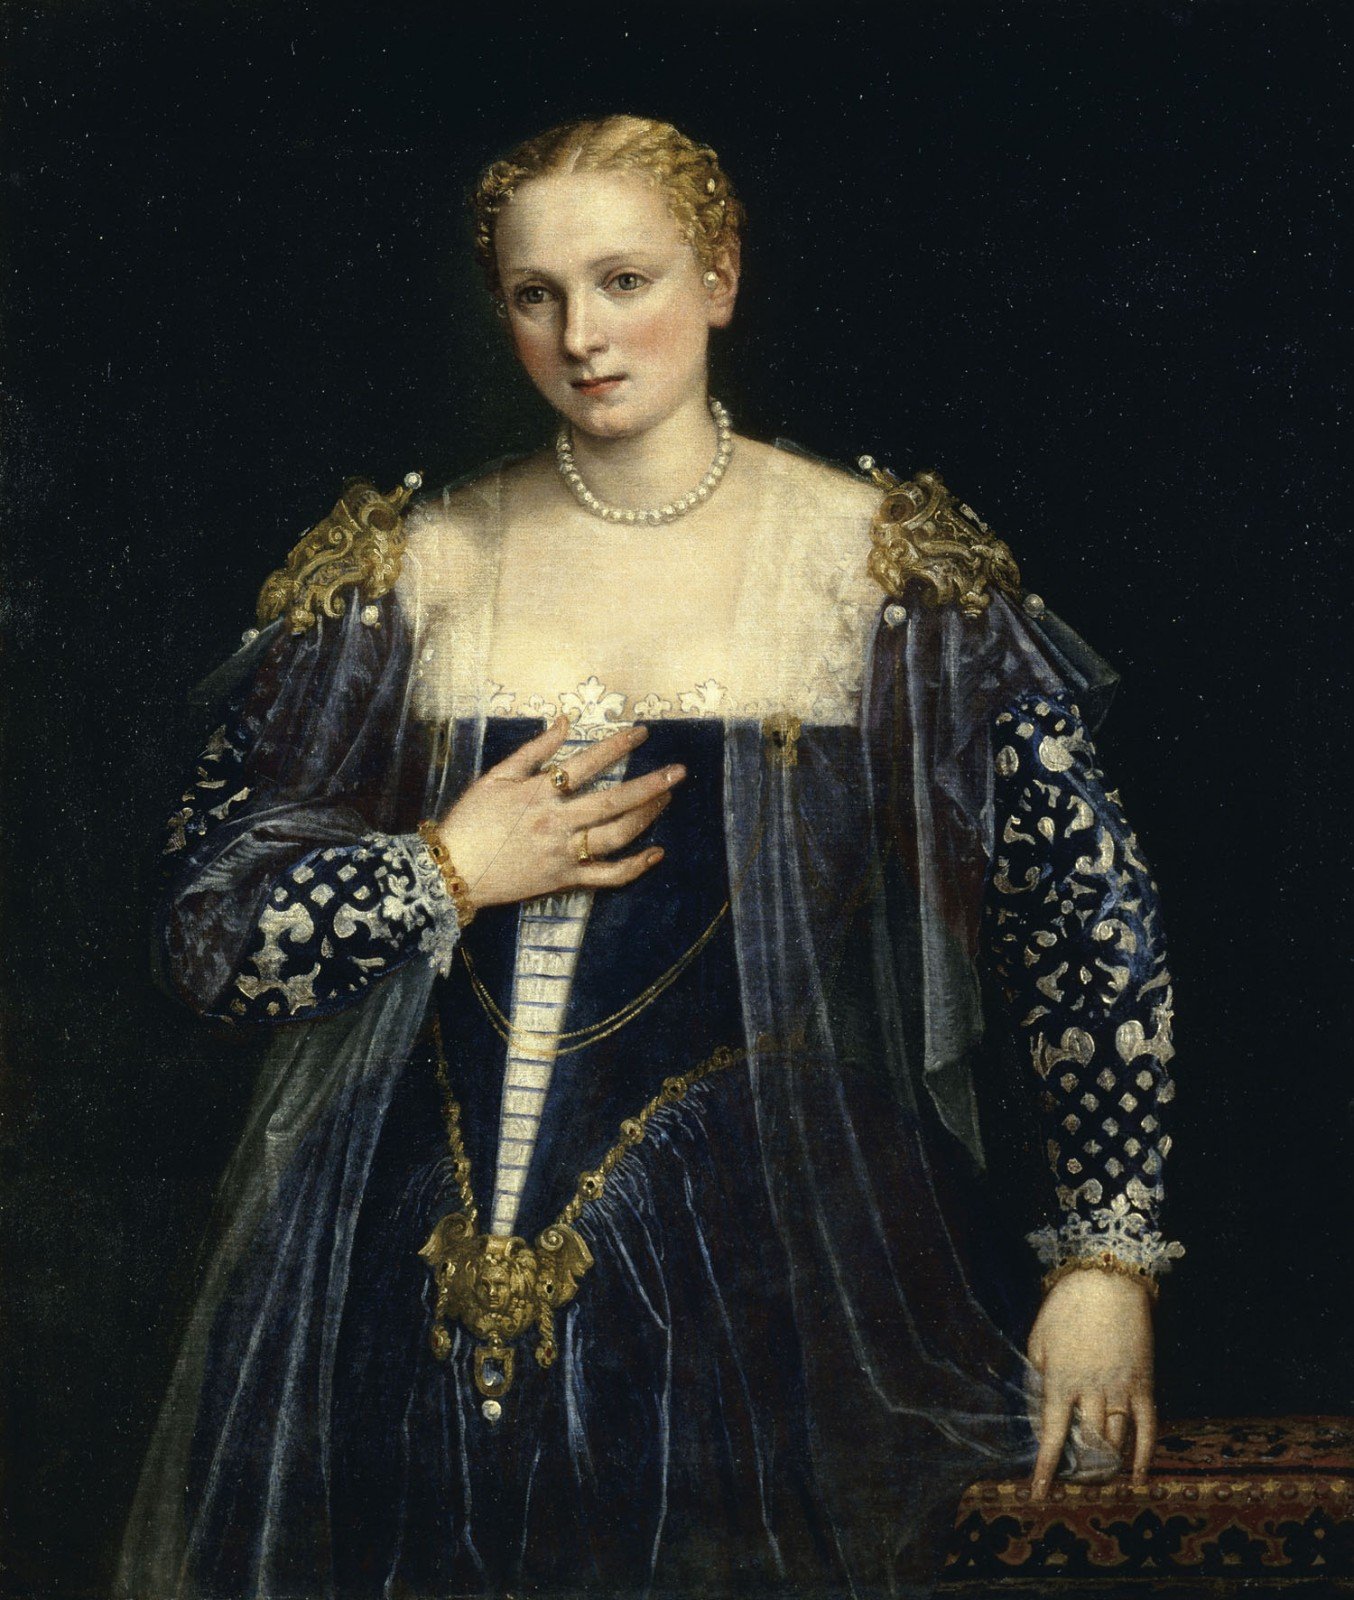 Paolo Veronese (1528-1588), Portrait of a Lady, known as the "Bella Nani", about 1560-5. Oil on canvas, 119 × 103 cm. Musée du Louvre, Paris © RMN (Musée du Louvre)/All rights reserved